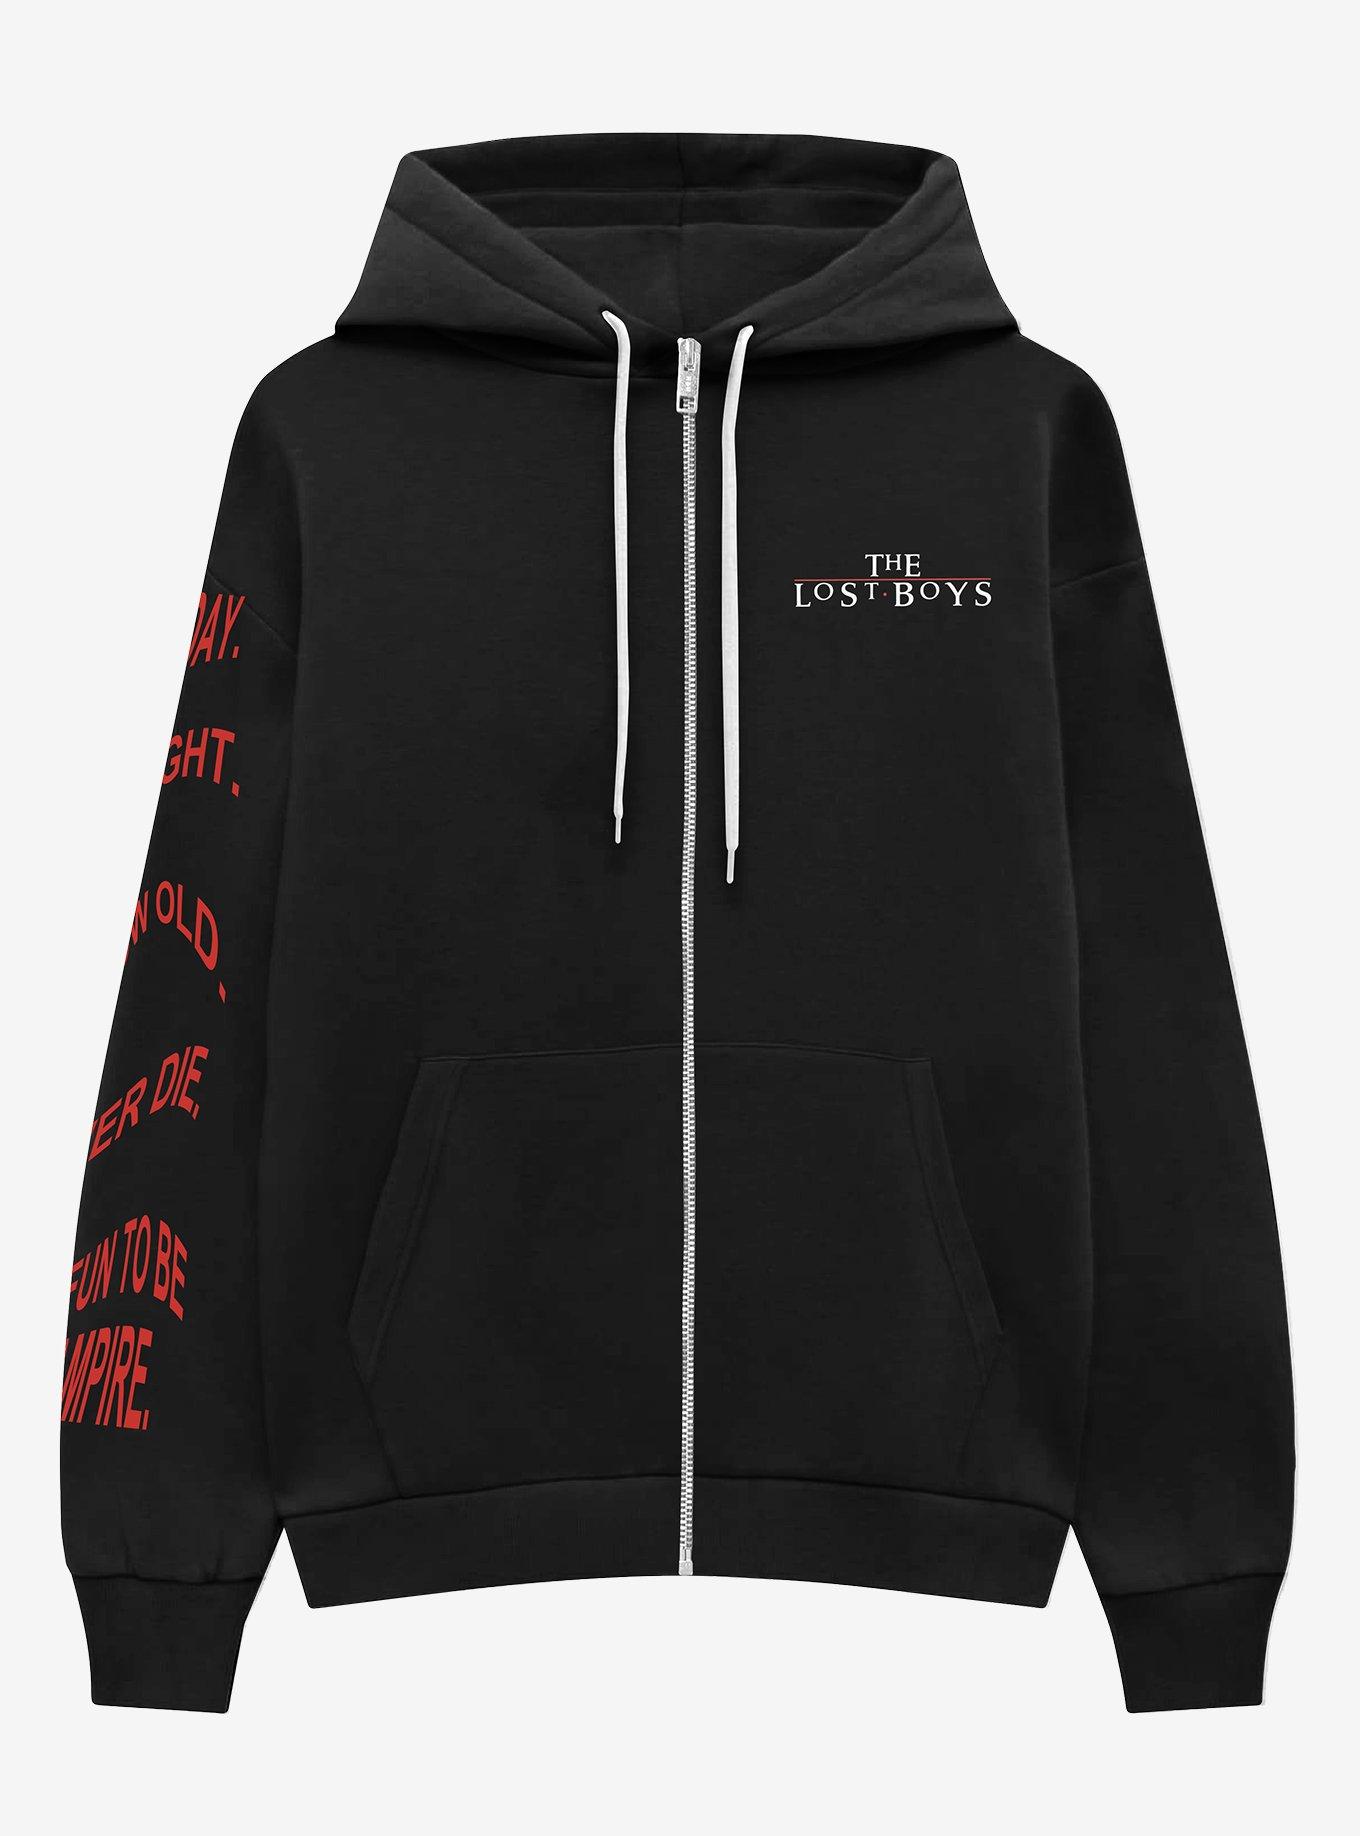 The Lost Boys Zip-Up Hoodie | Hot Topic